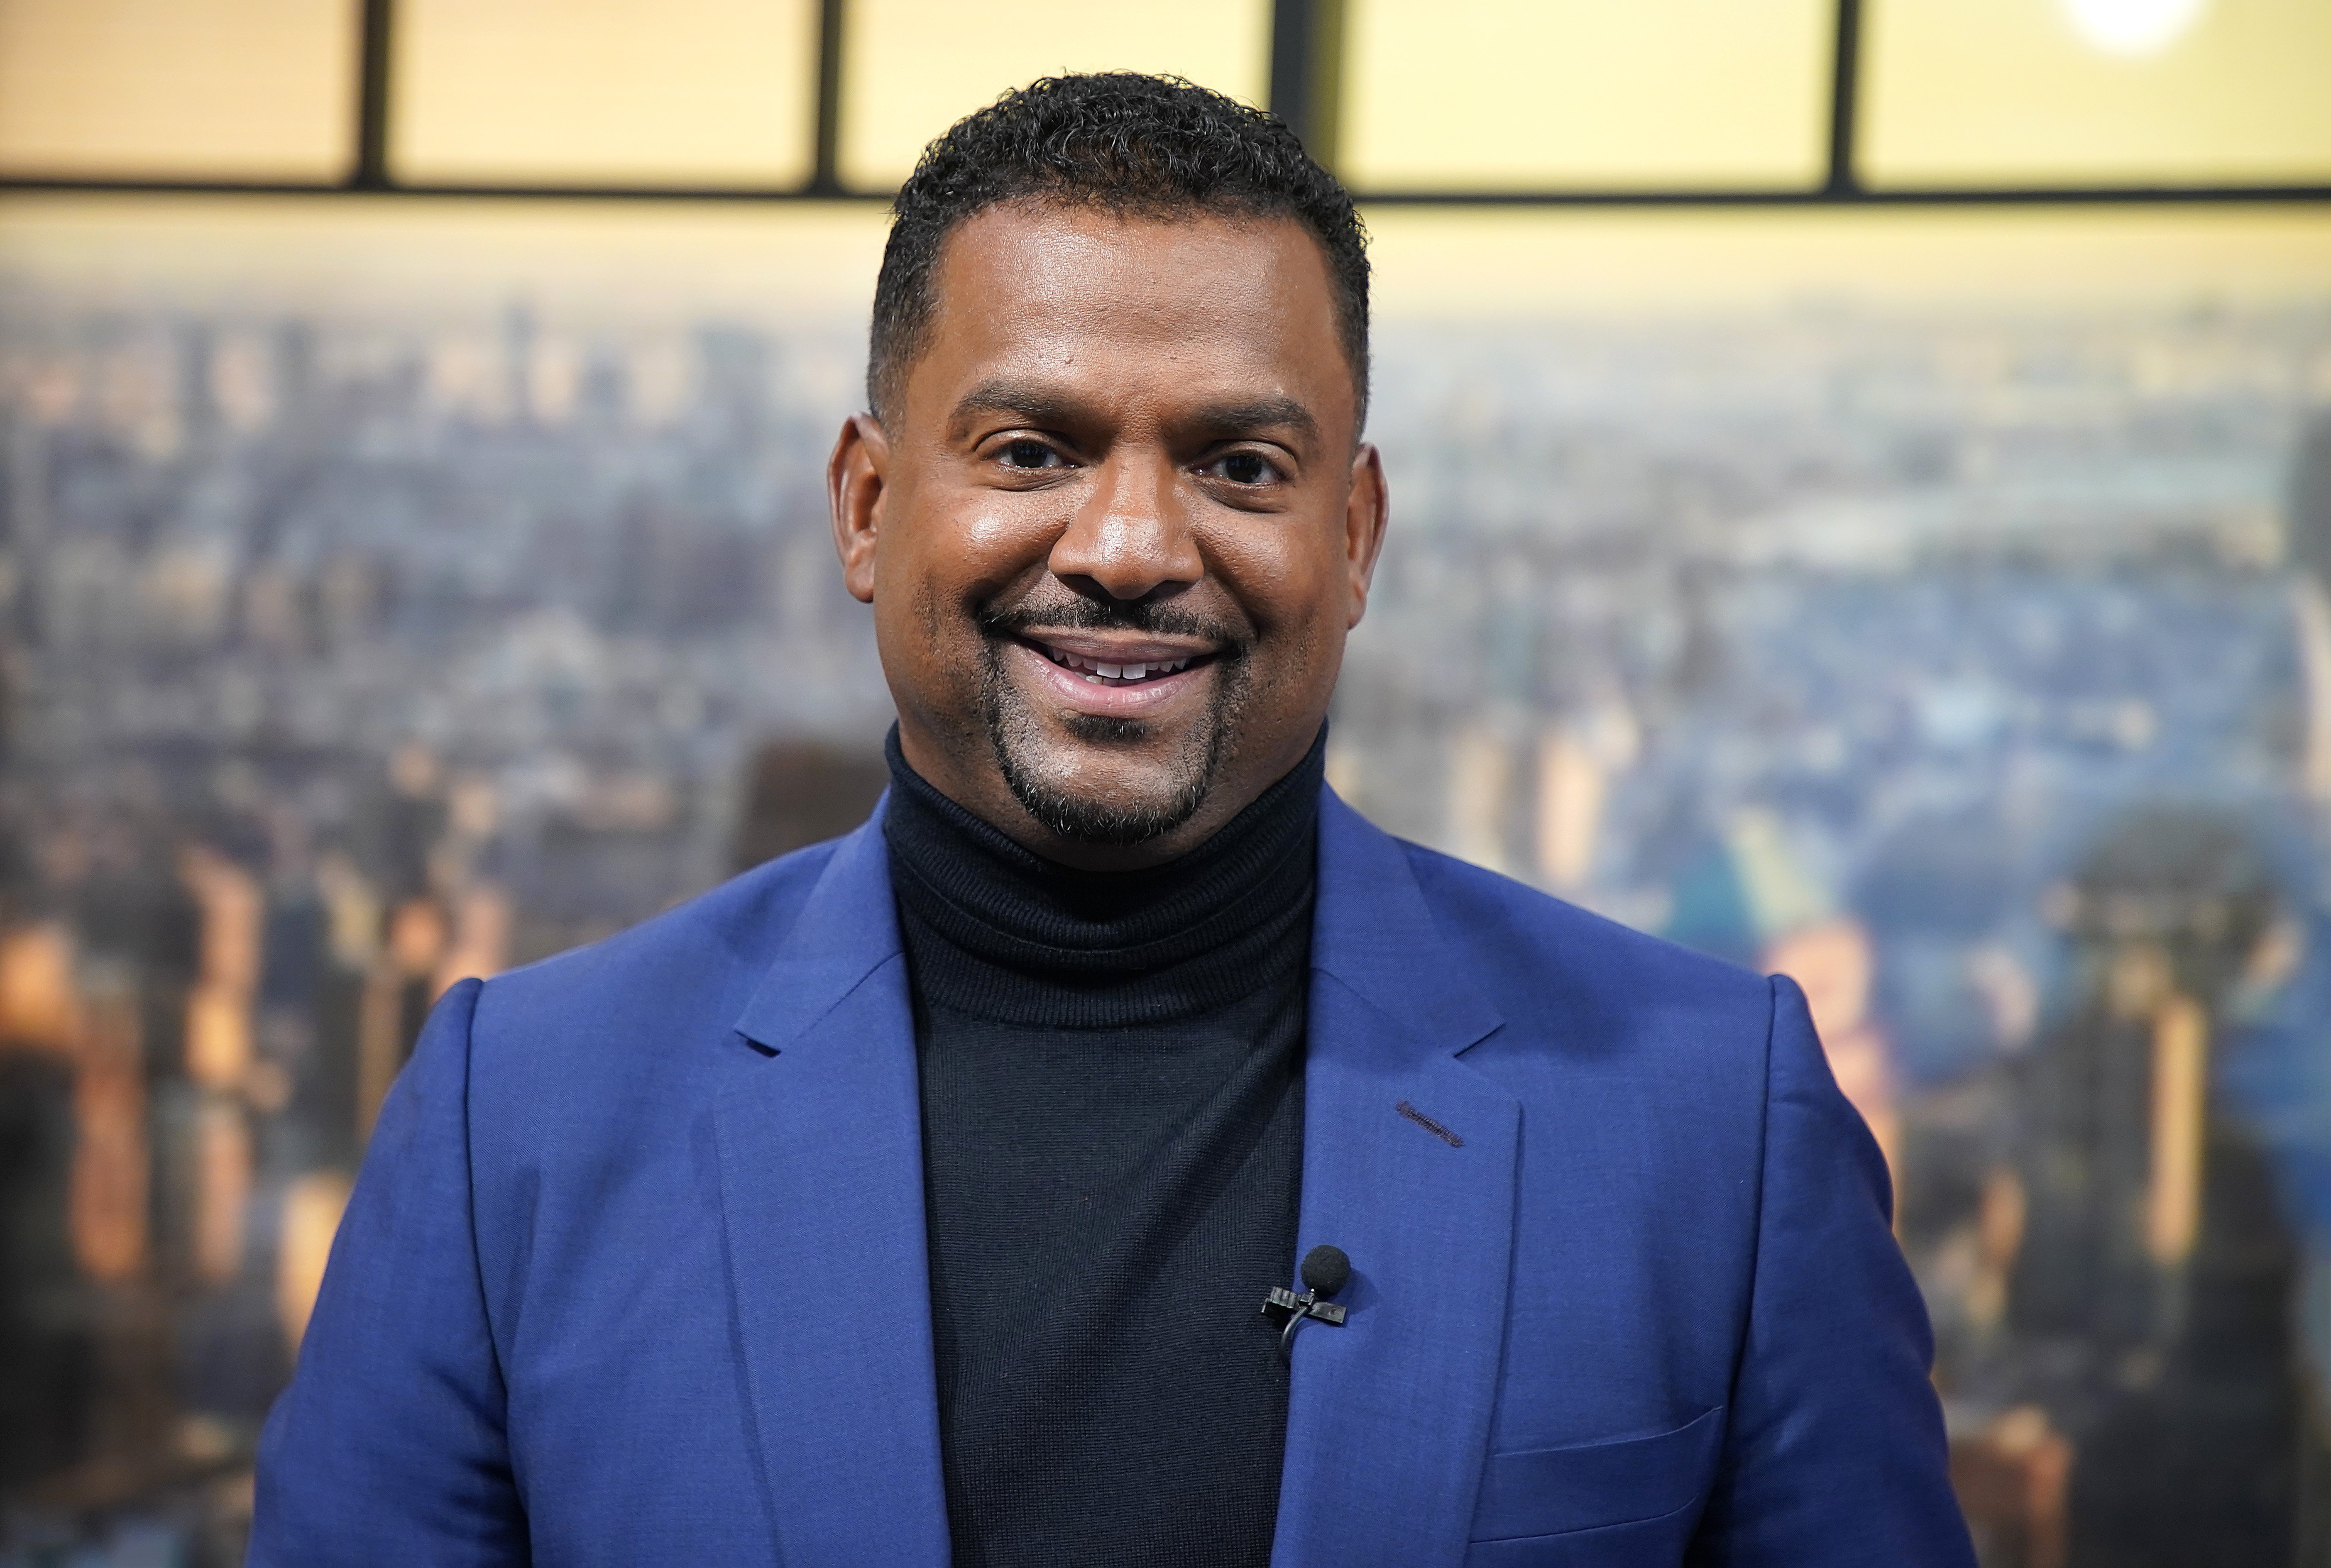 Alfonso Ribeiro besucht die People Now Studios in New York City am 14. November 2019. | Quelle: Getty Images